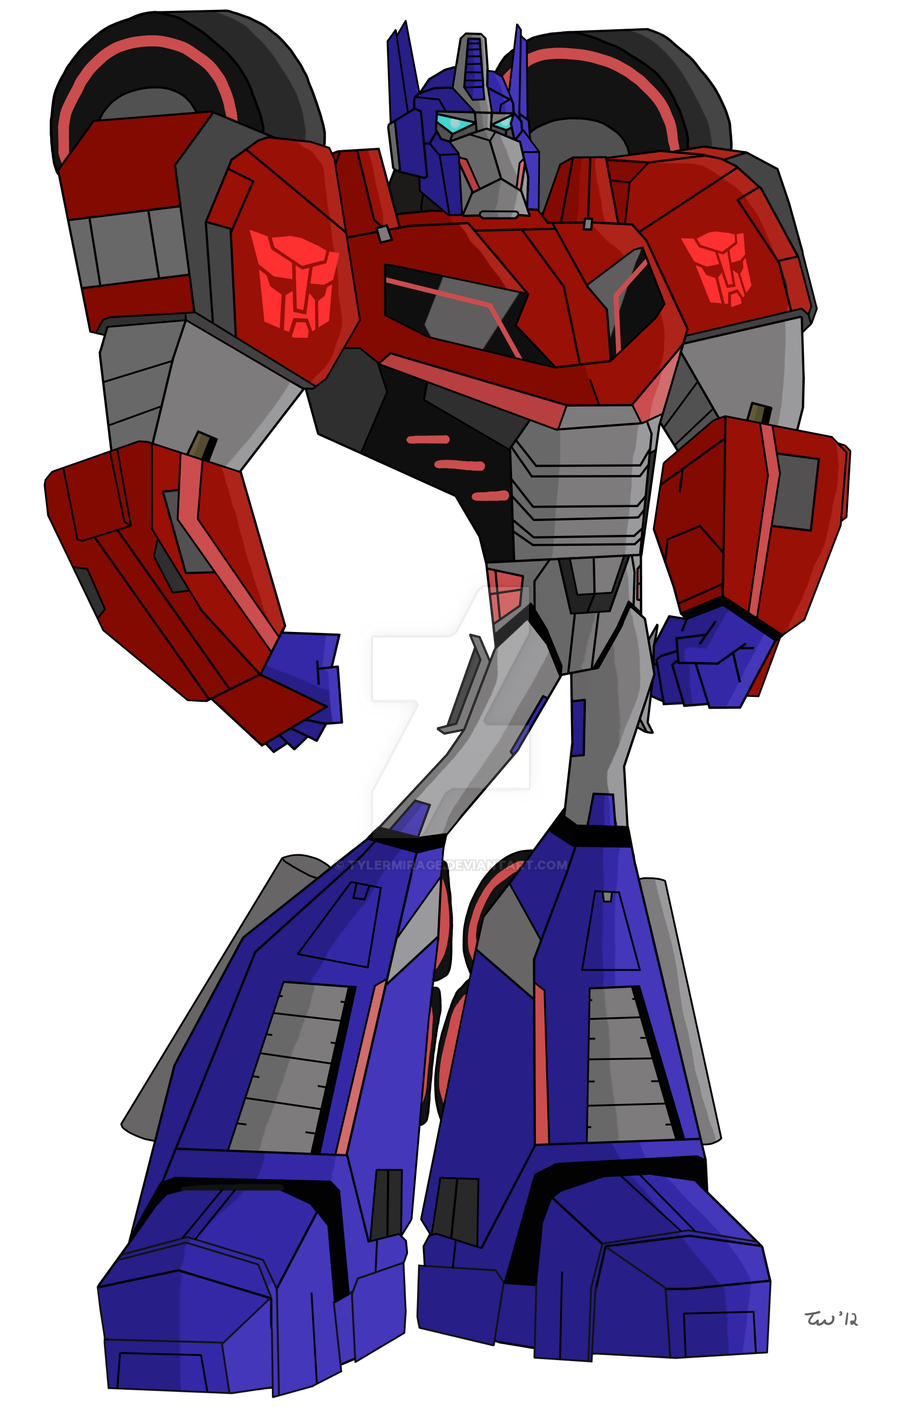 Animated Optimus Prime-War for Cybertron by TylerMirage on DeviantArt